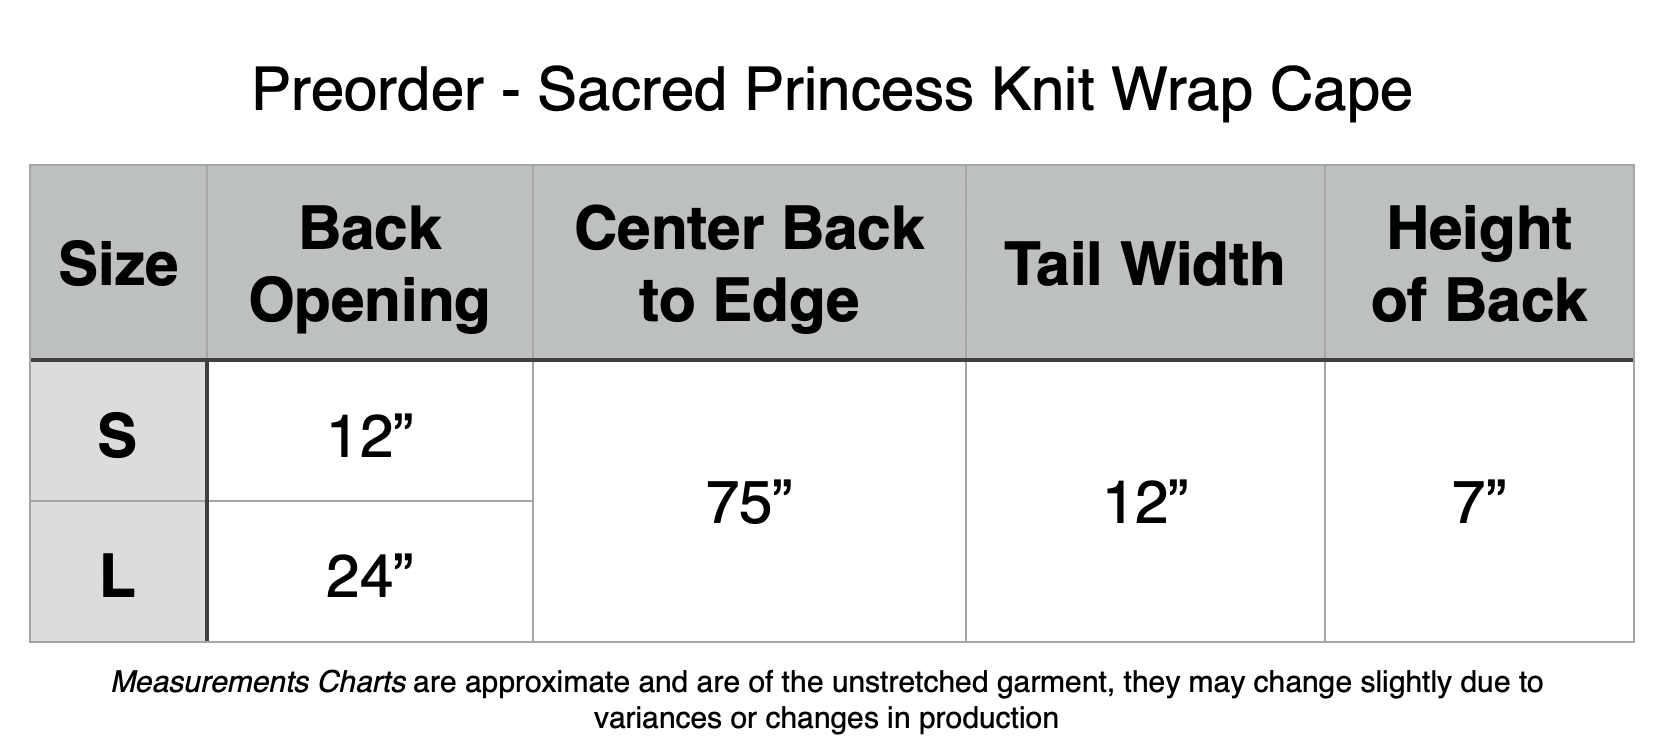 PREORDER: Sacred Princess Knit Wrap Cape - Cursed Lake Blue. Small: 12” Back Opening, 75” Center Back to Edge, 12” Tail Width, 7” Back Height. Large: 24” Back Opening, 75” Center Back to Edge, 12” Tail Width, 7” Back Height.